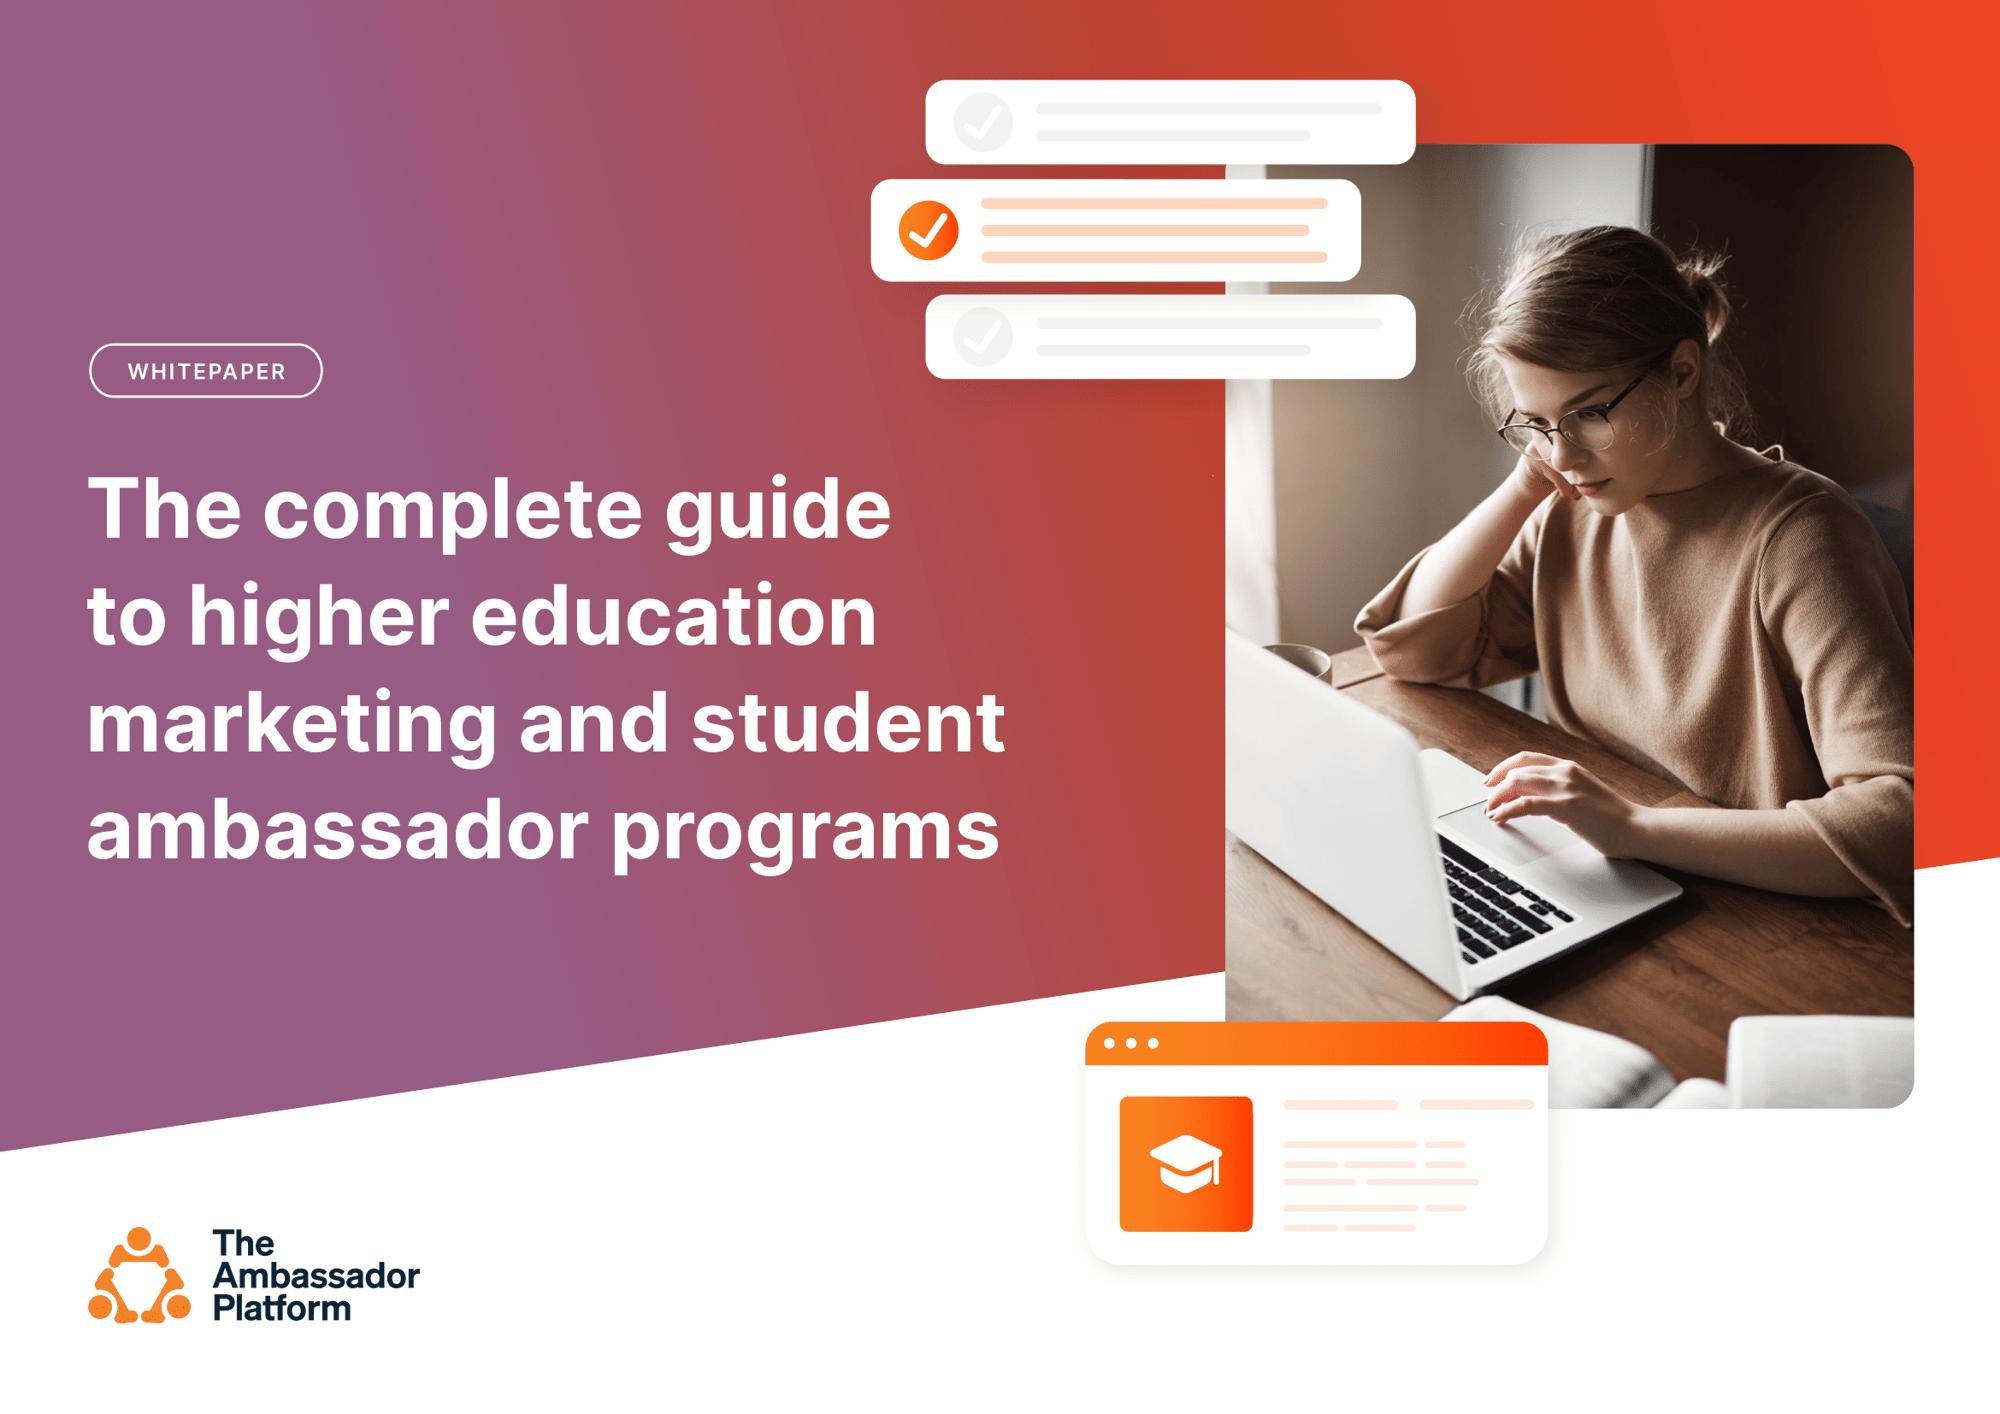 Whitepaper - The complete guide to higher education marketing and student ambassador programs-01